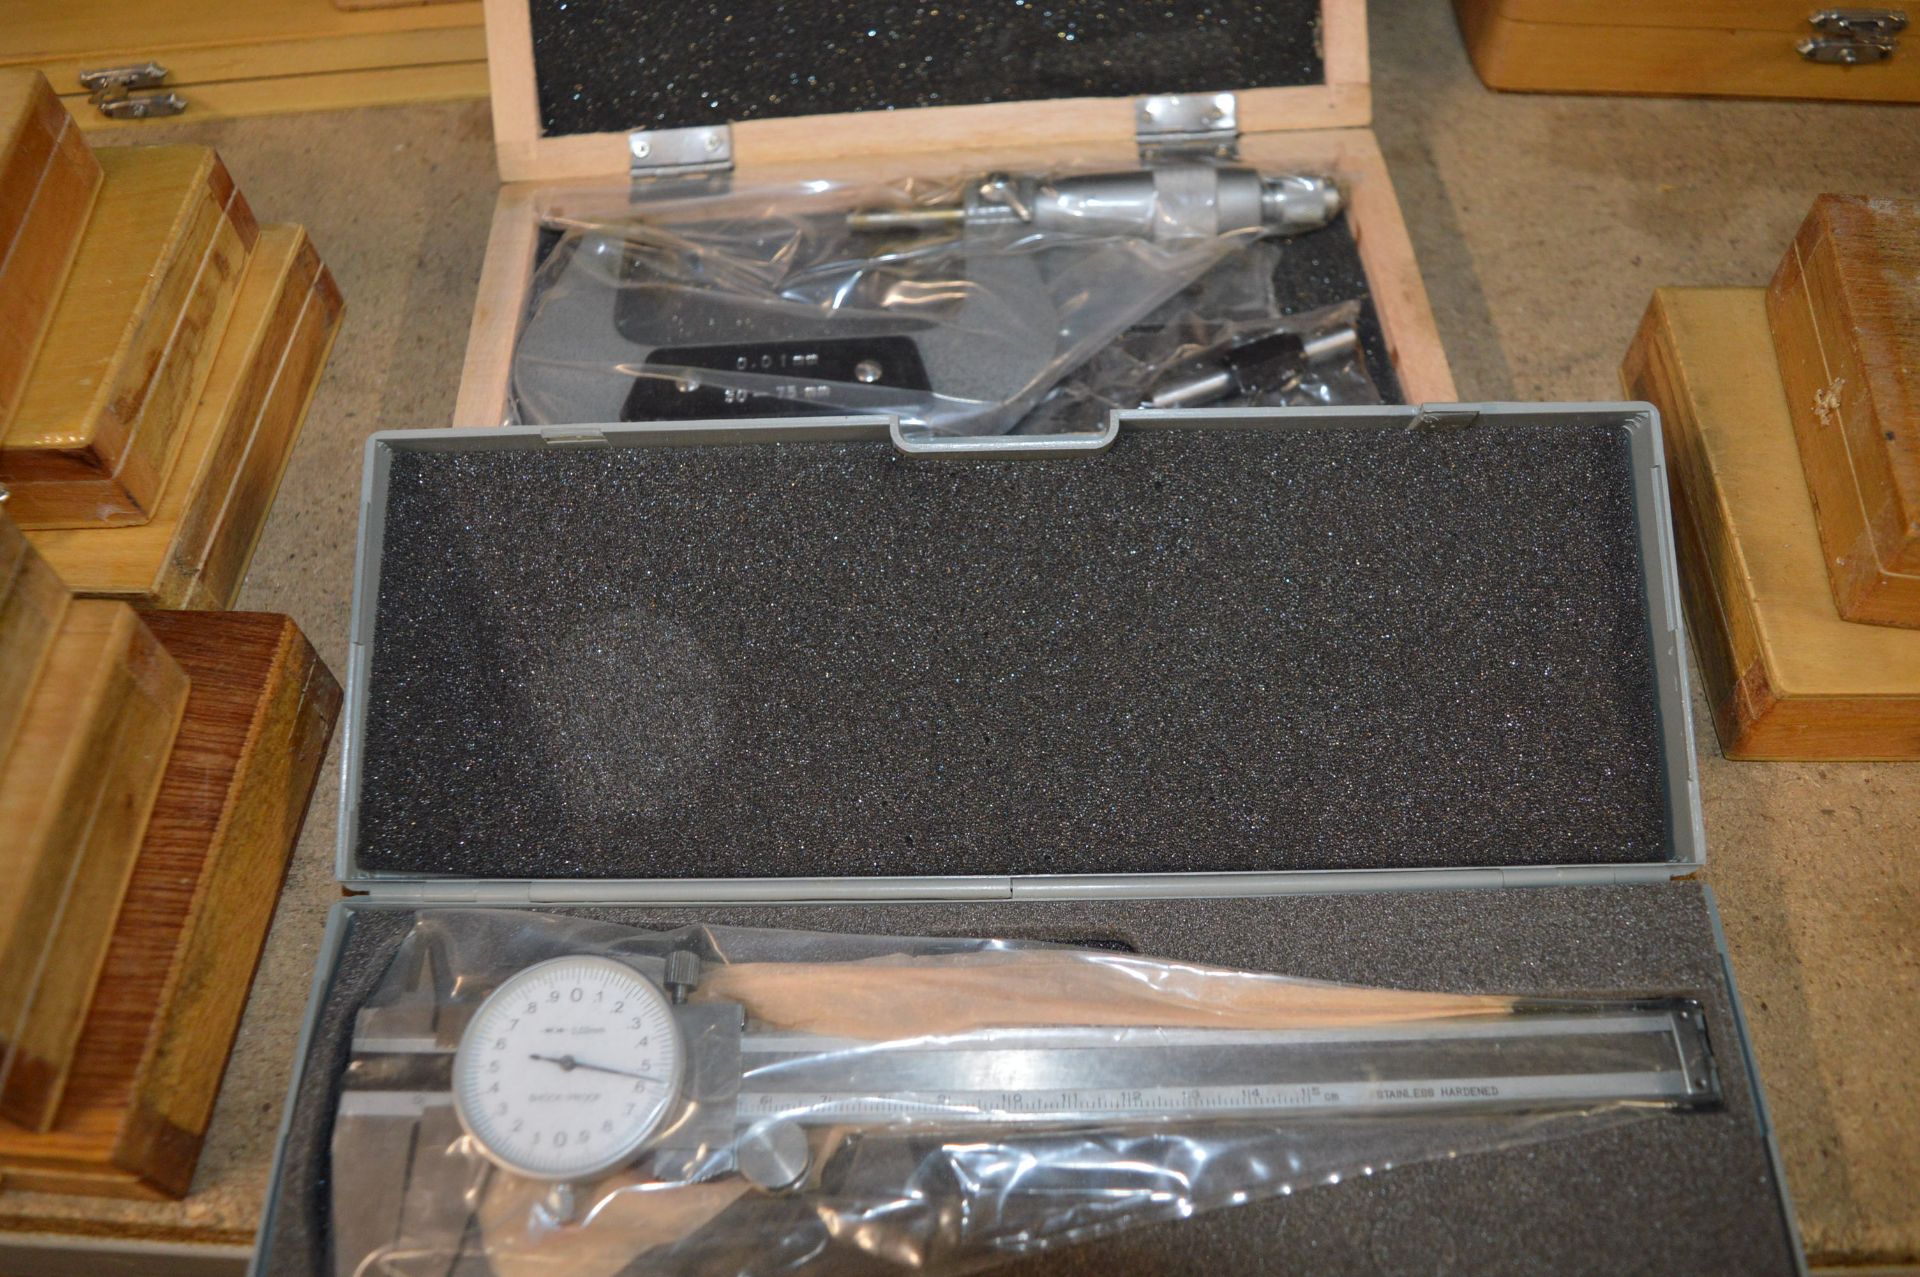 0-15cm Vernier and a 50-75mm Micrometer